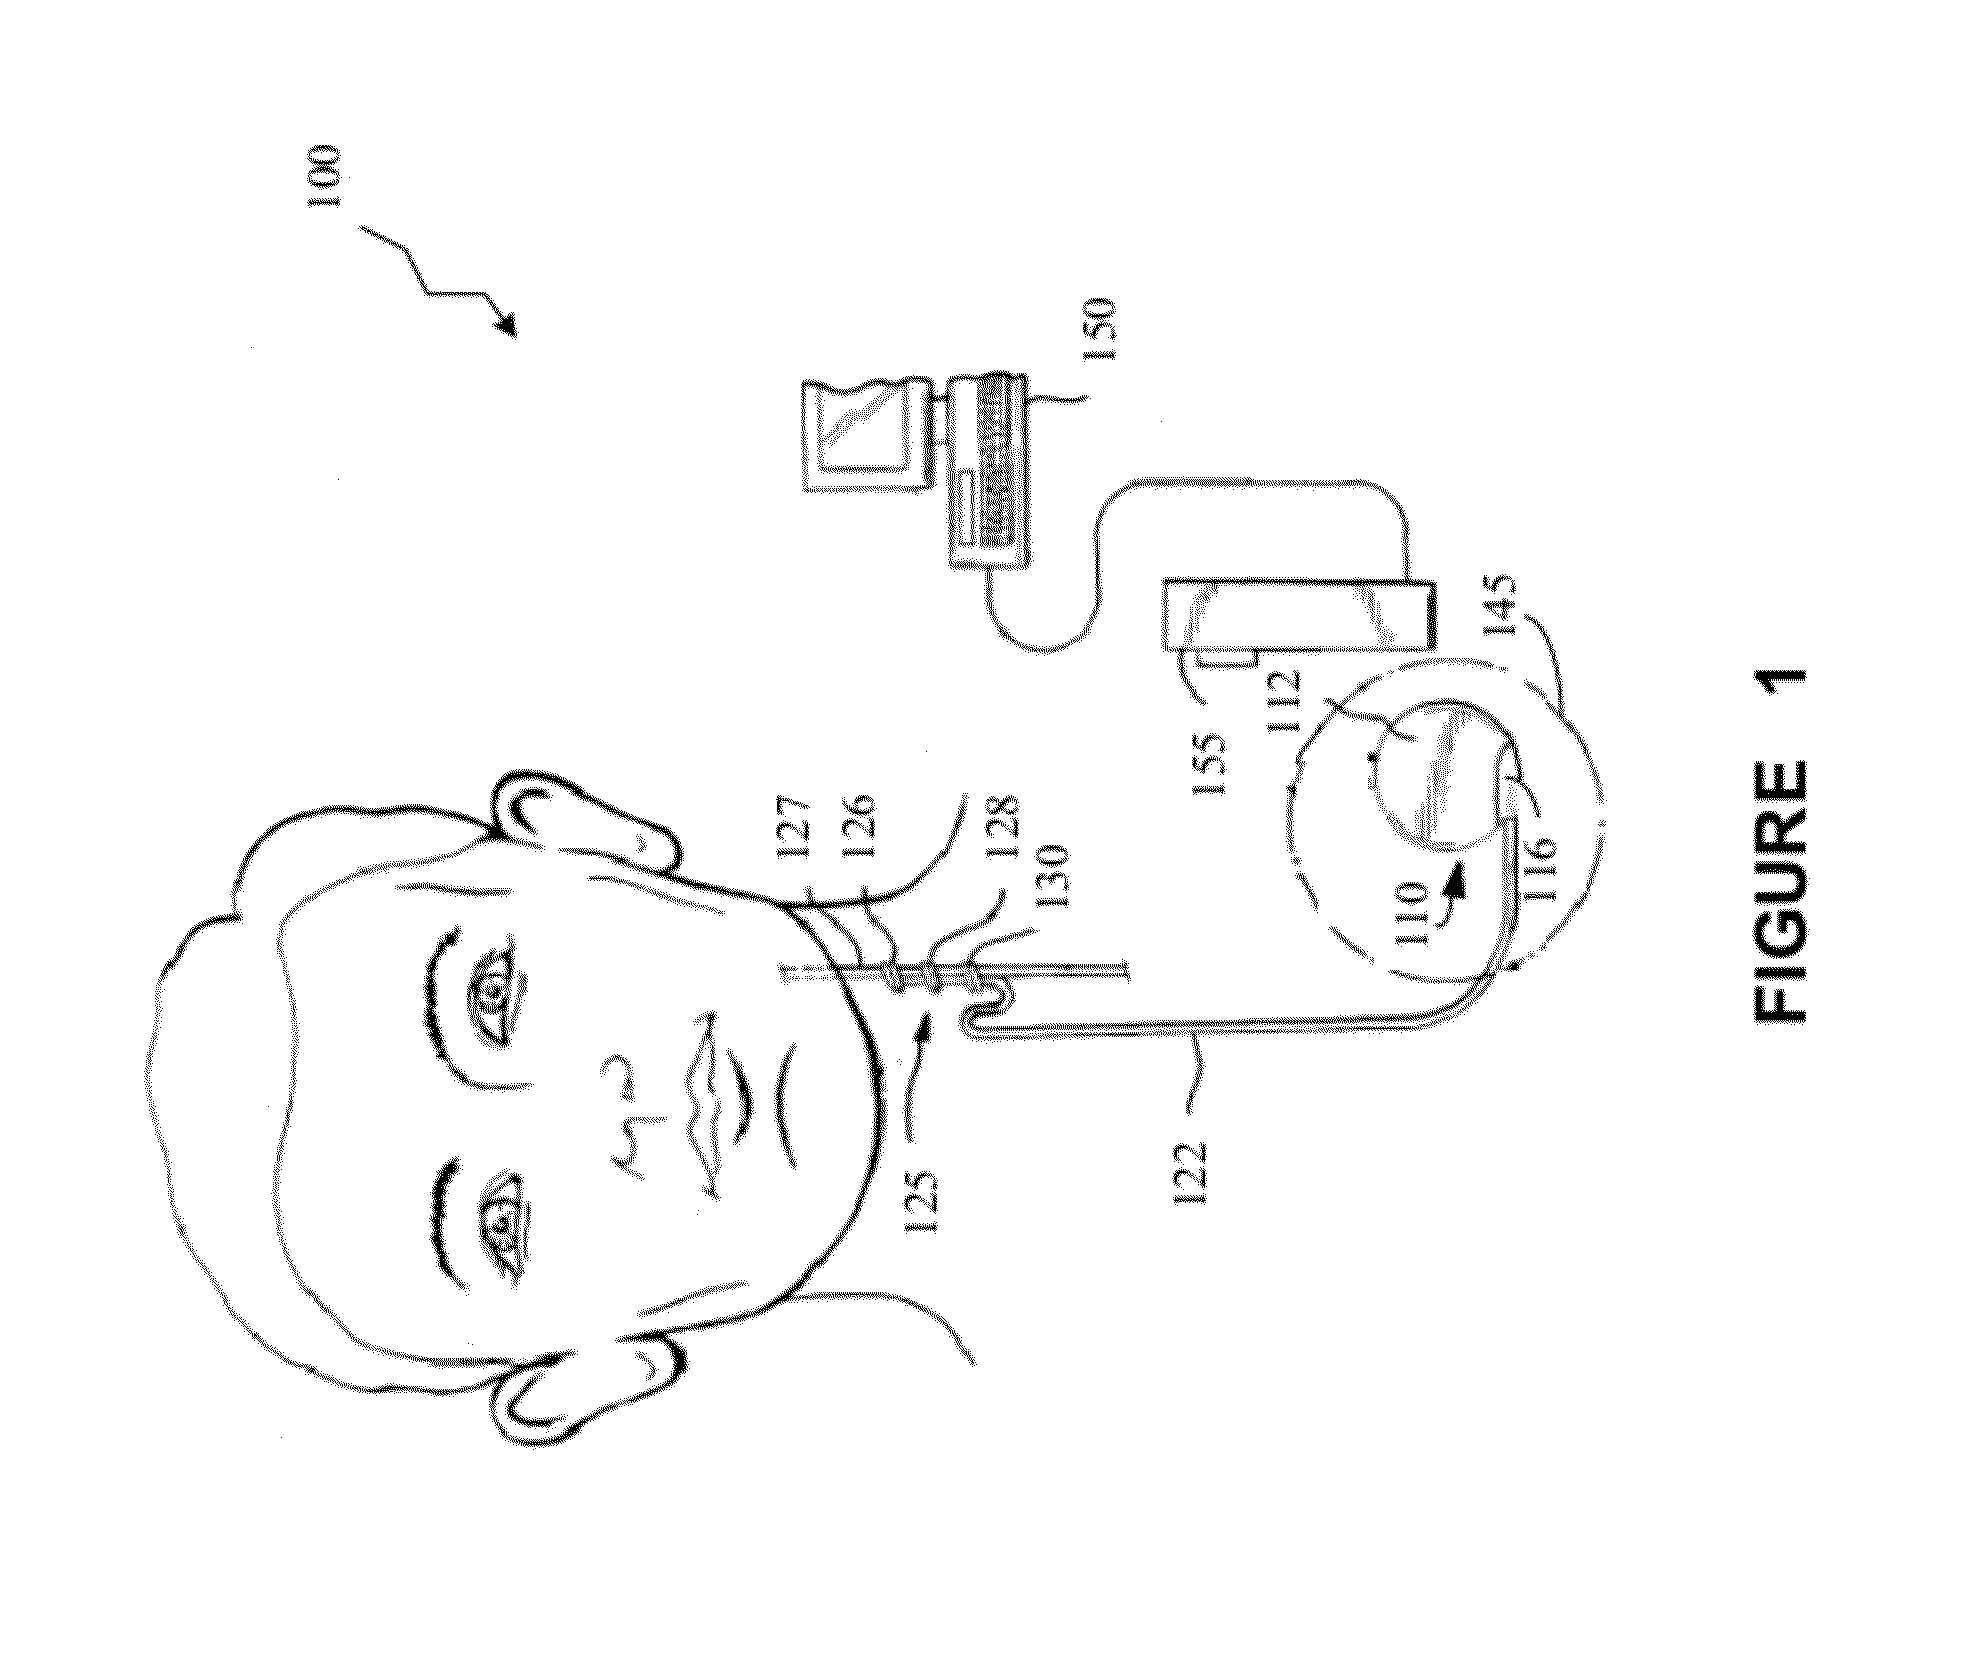 Detecting or validating a detection of a state change from a template of heart rate derivative shape or heart beat wave complex